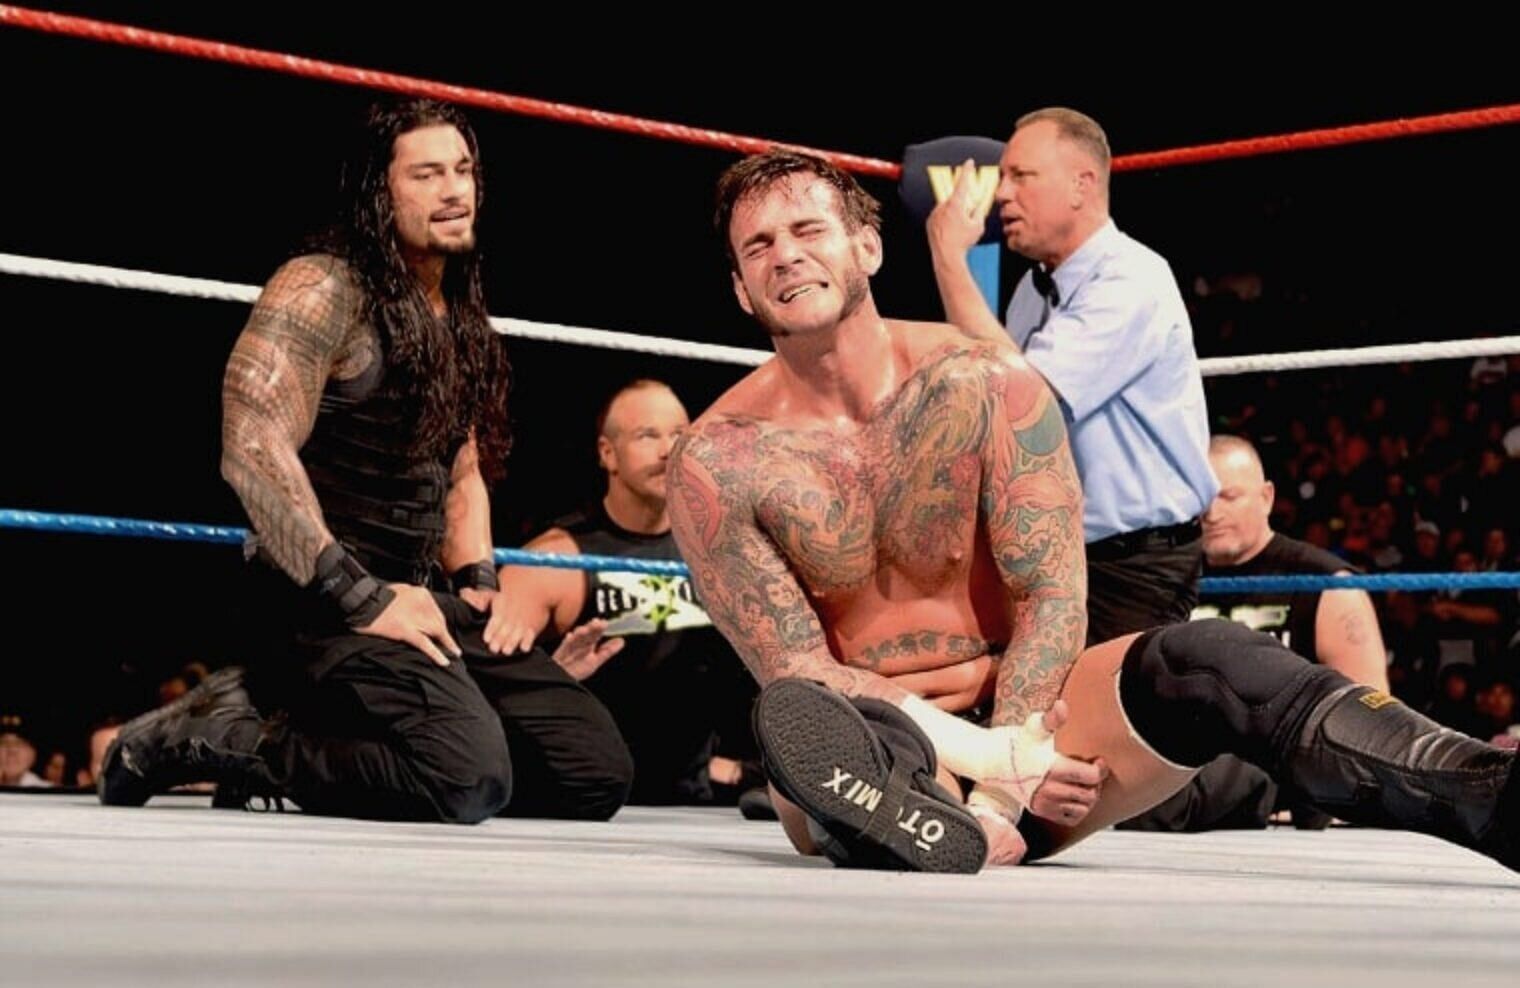 CM Punk faced Roman Reigns during his rivalry with the SHIELD